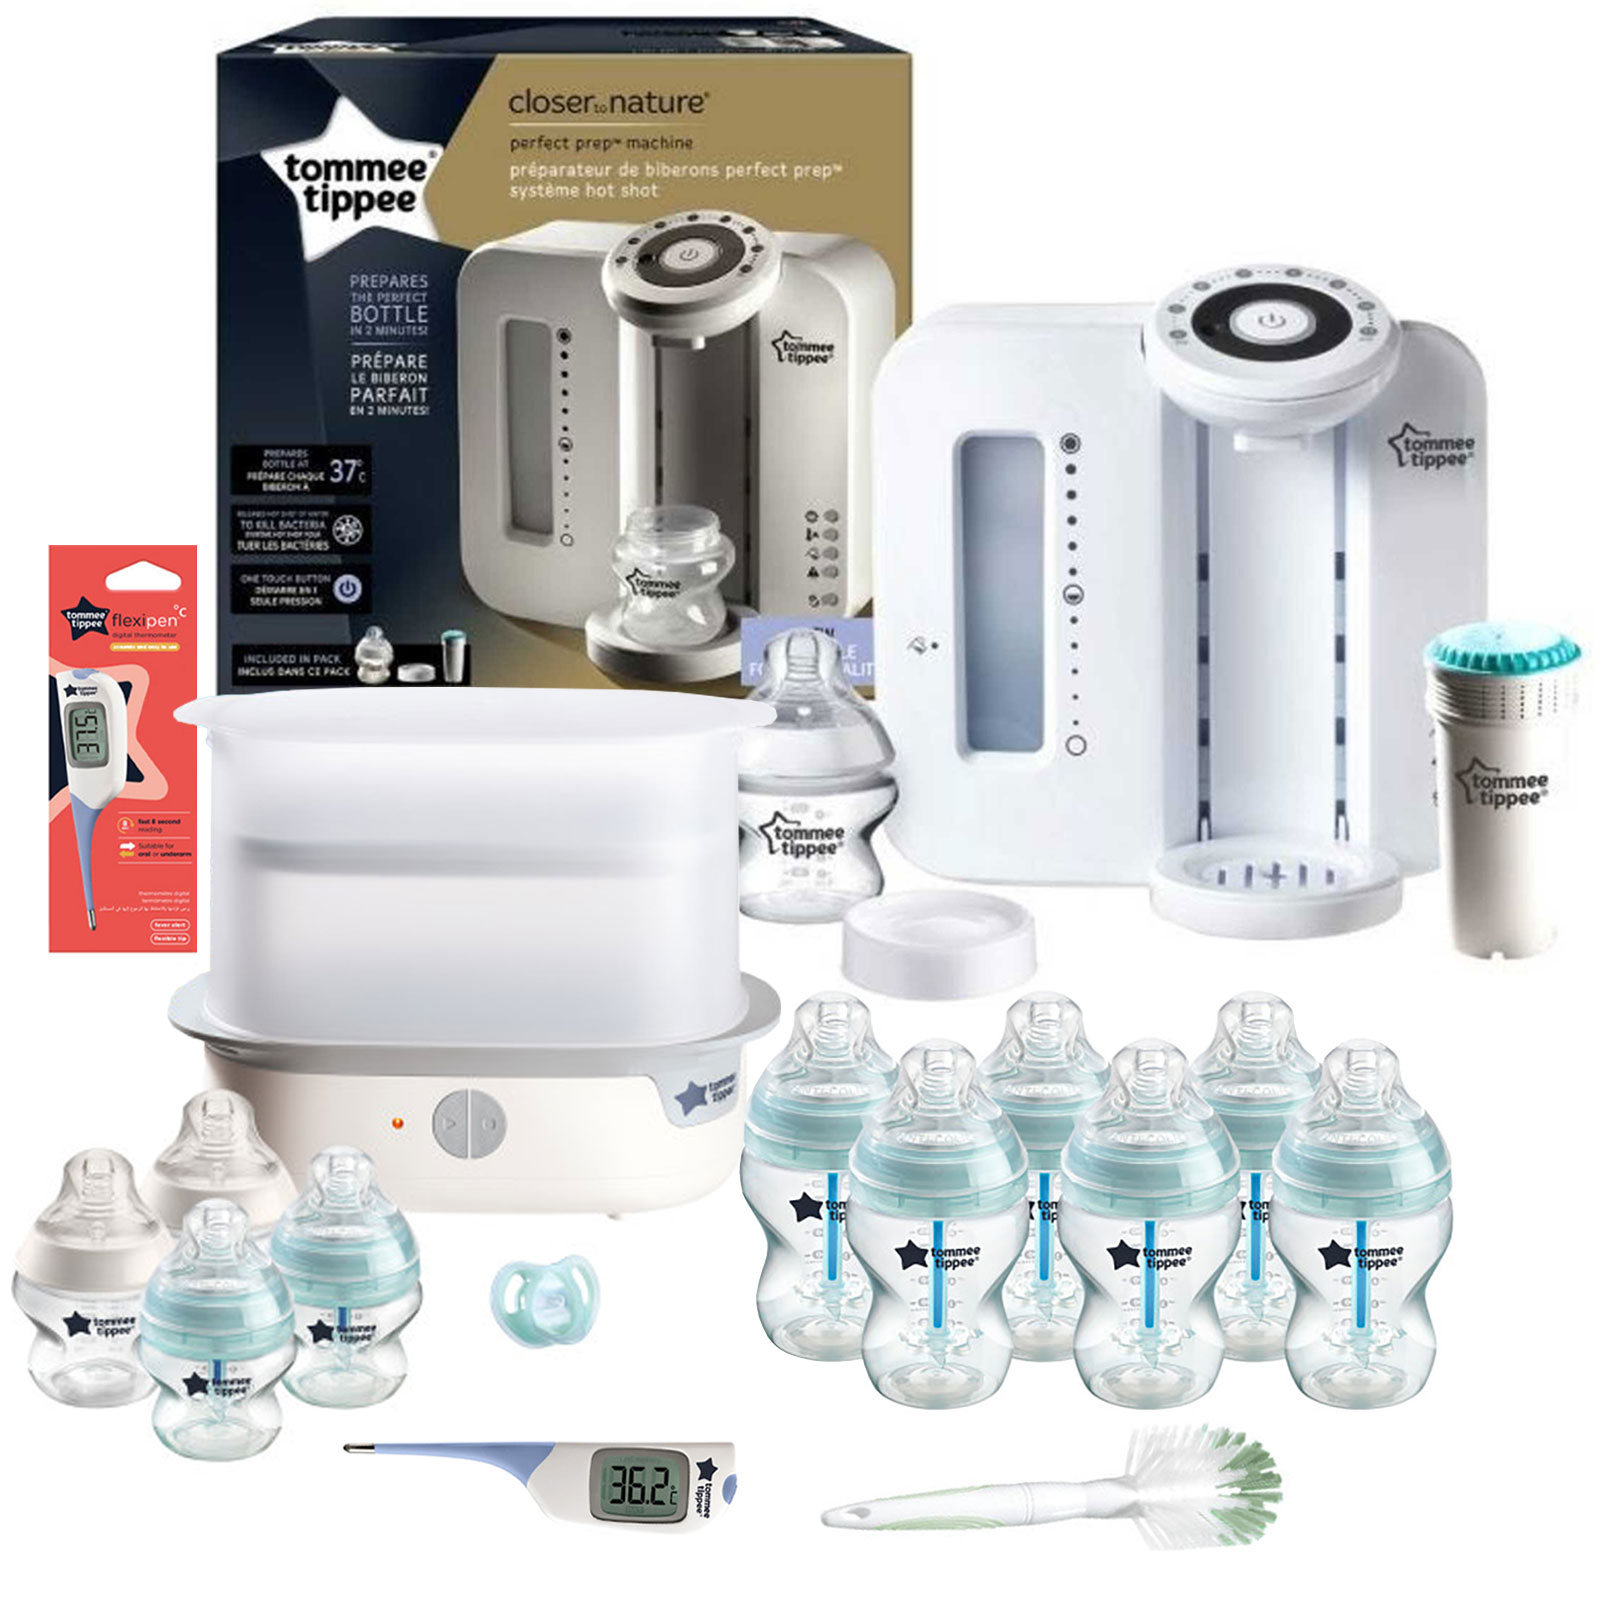 Tommee Tippee 16pc Perfect Prep Machine Complete Steriliser Anti-Colic Baby Bottle and Thermometer Feeding Bundle - White / Natural Blue